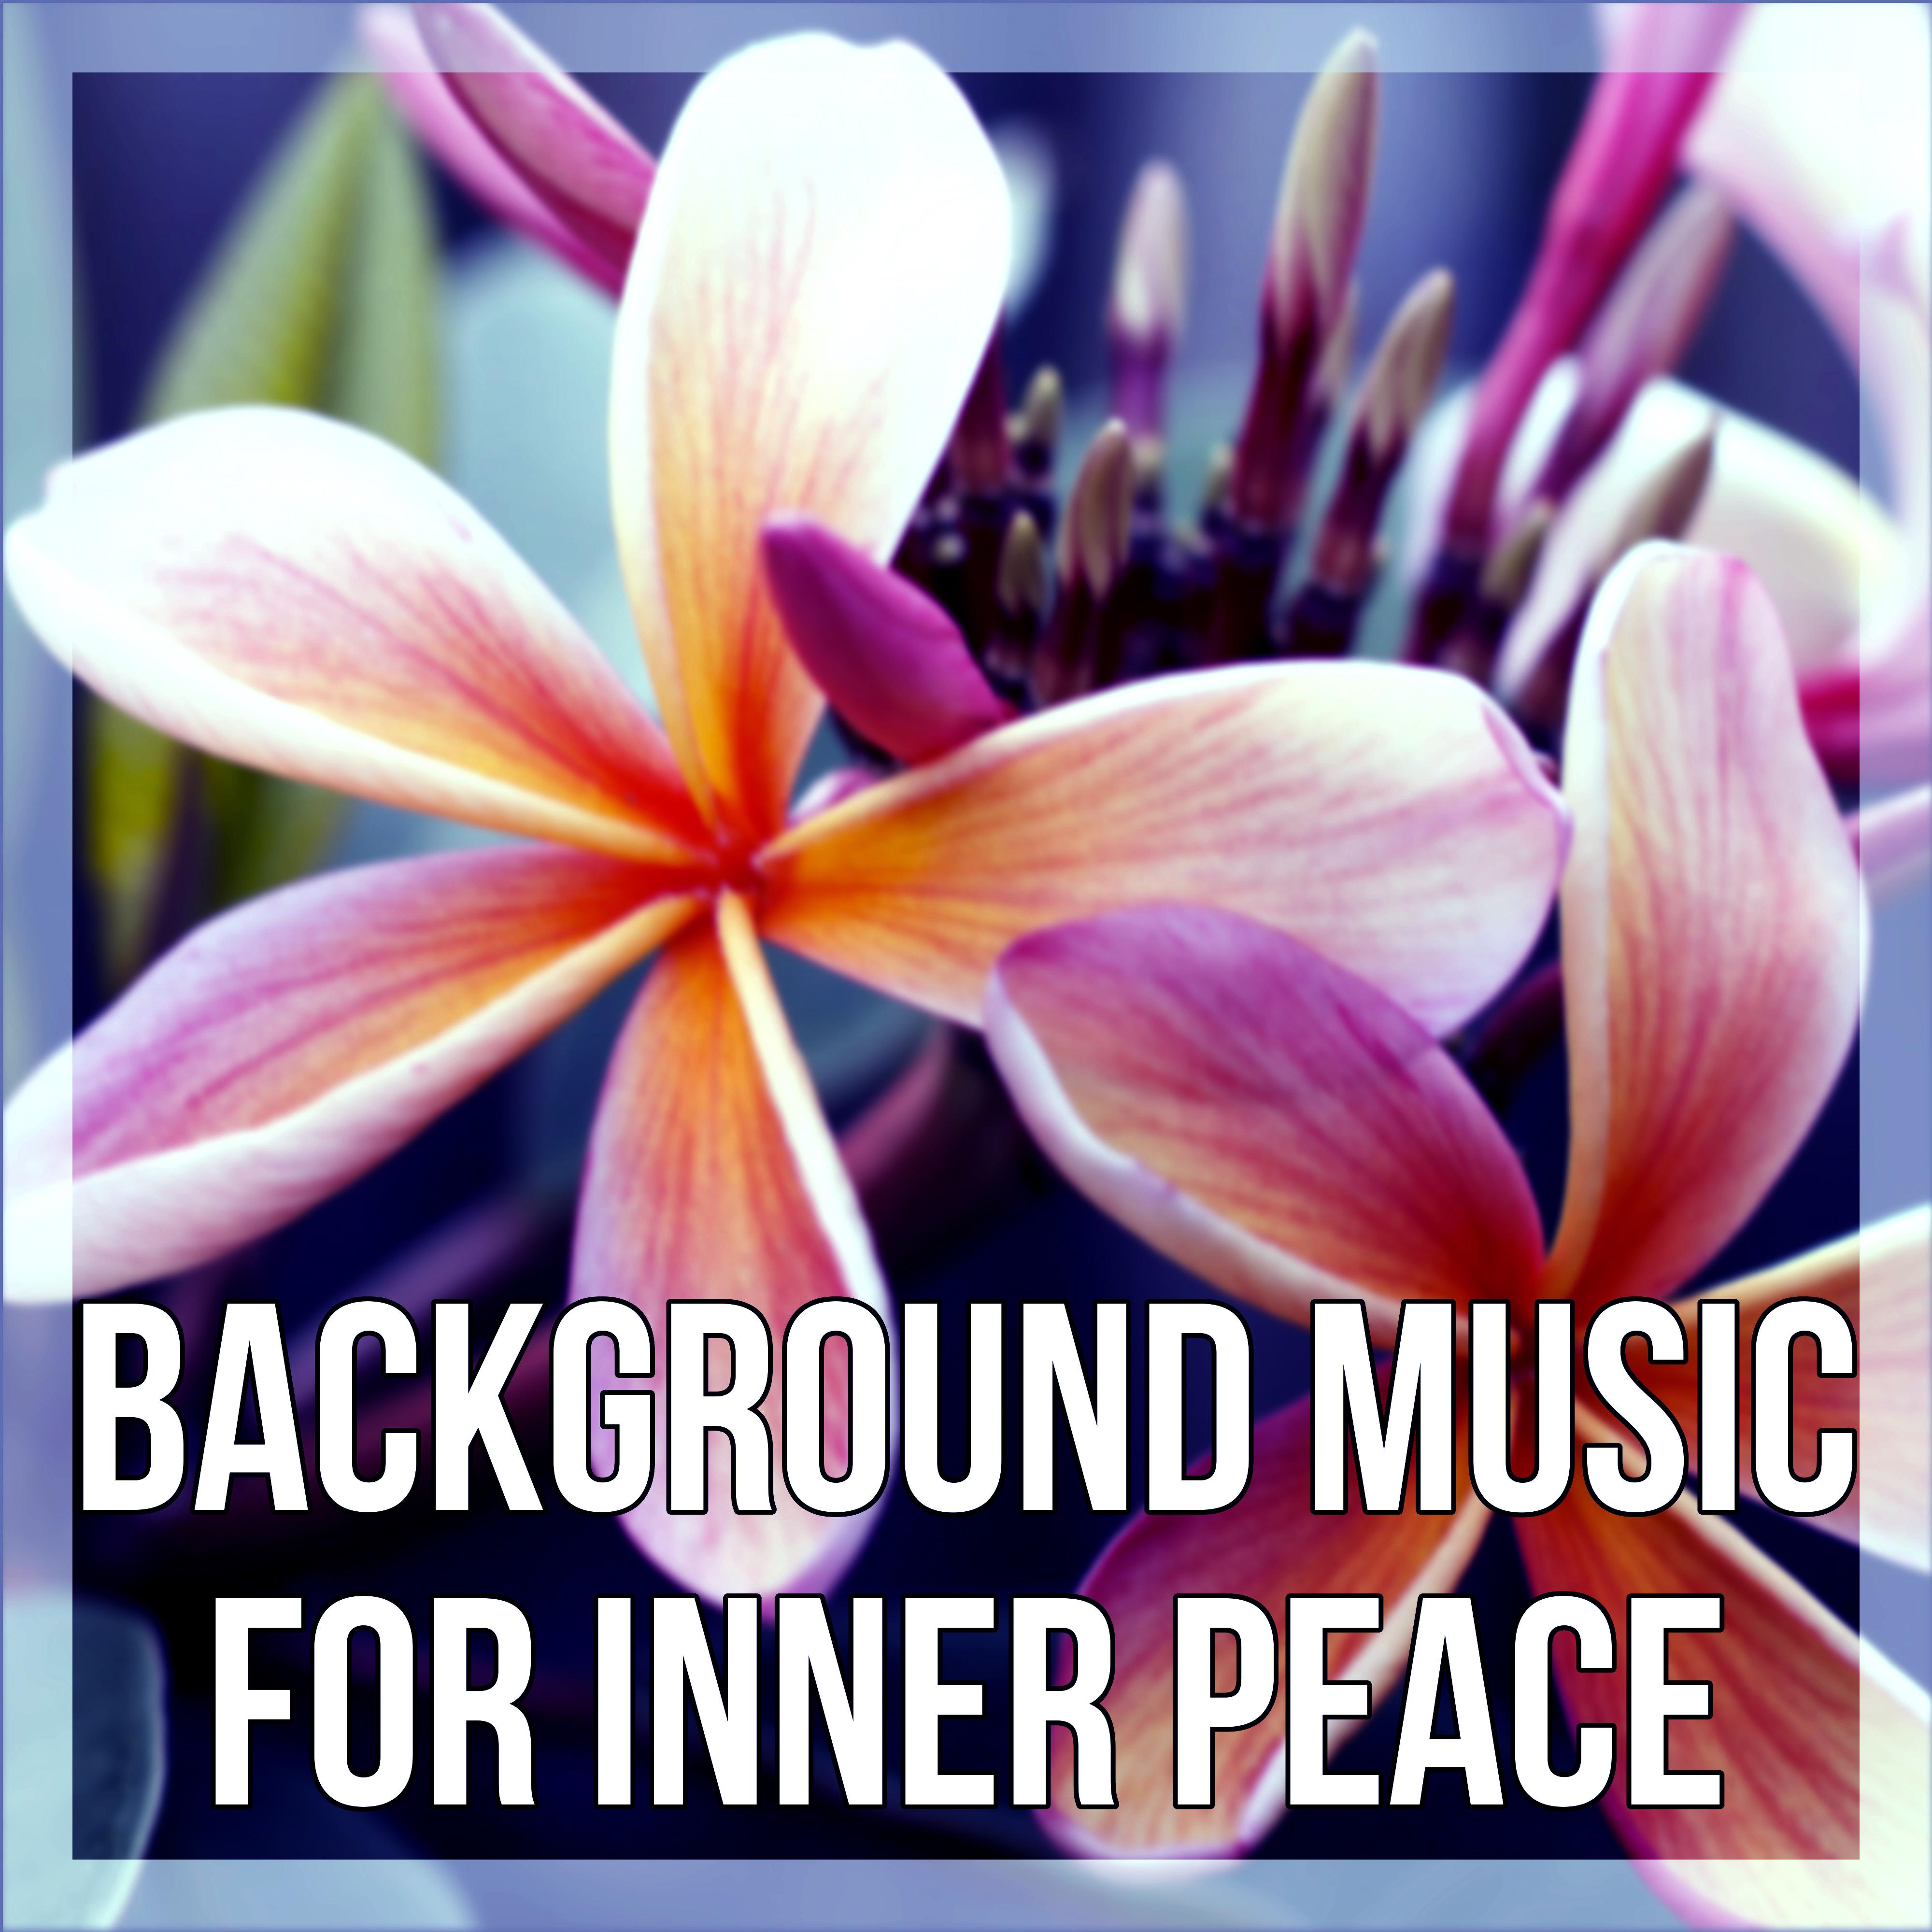 Background Music for Inner Peace - New Age Meditation and Relaxation for Aqua Day Spa, Relaxing Moments, Healing Spa, Sounds of Nature for Center Hotel Spa